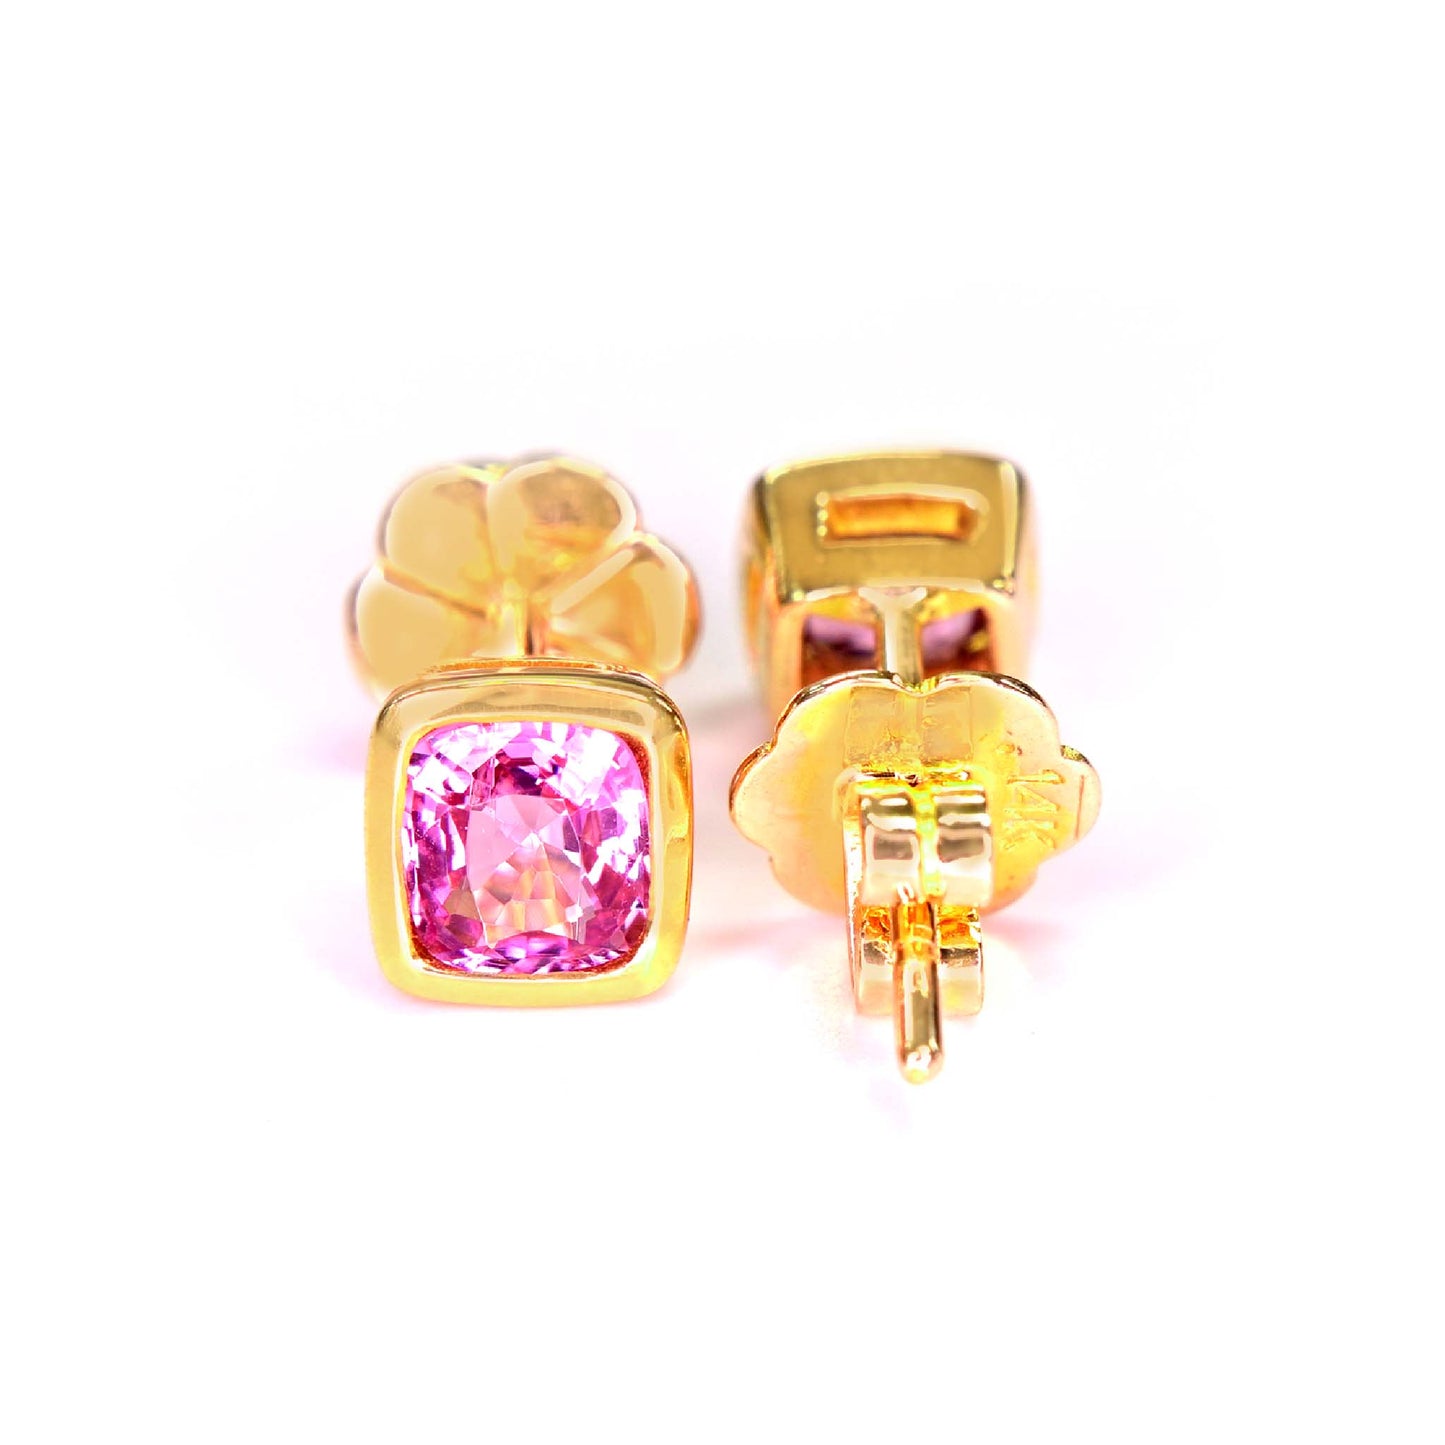 Beautiful Pink Spinel earrings in 14k yellow gold